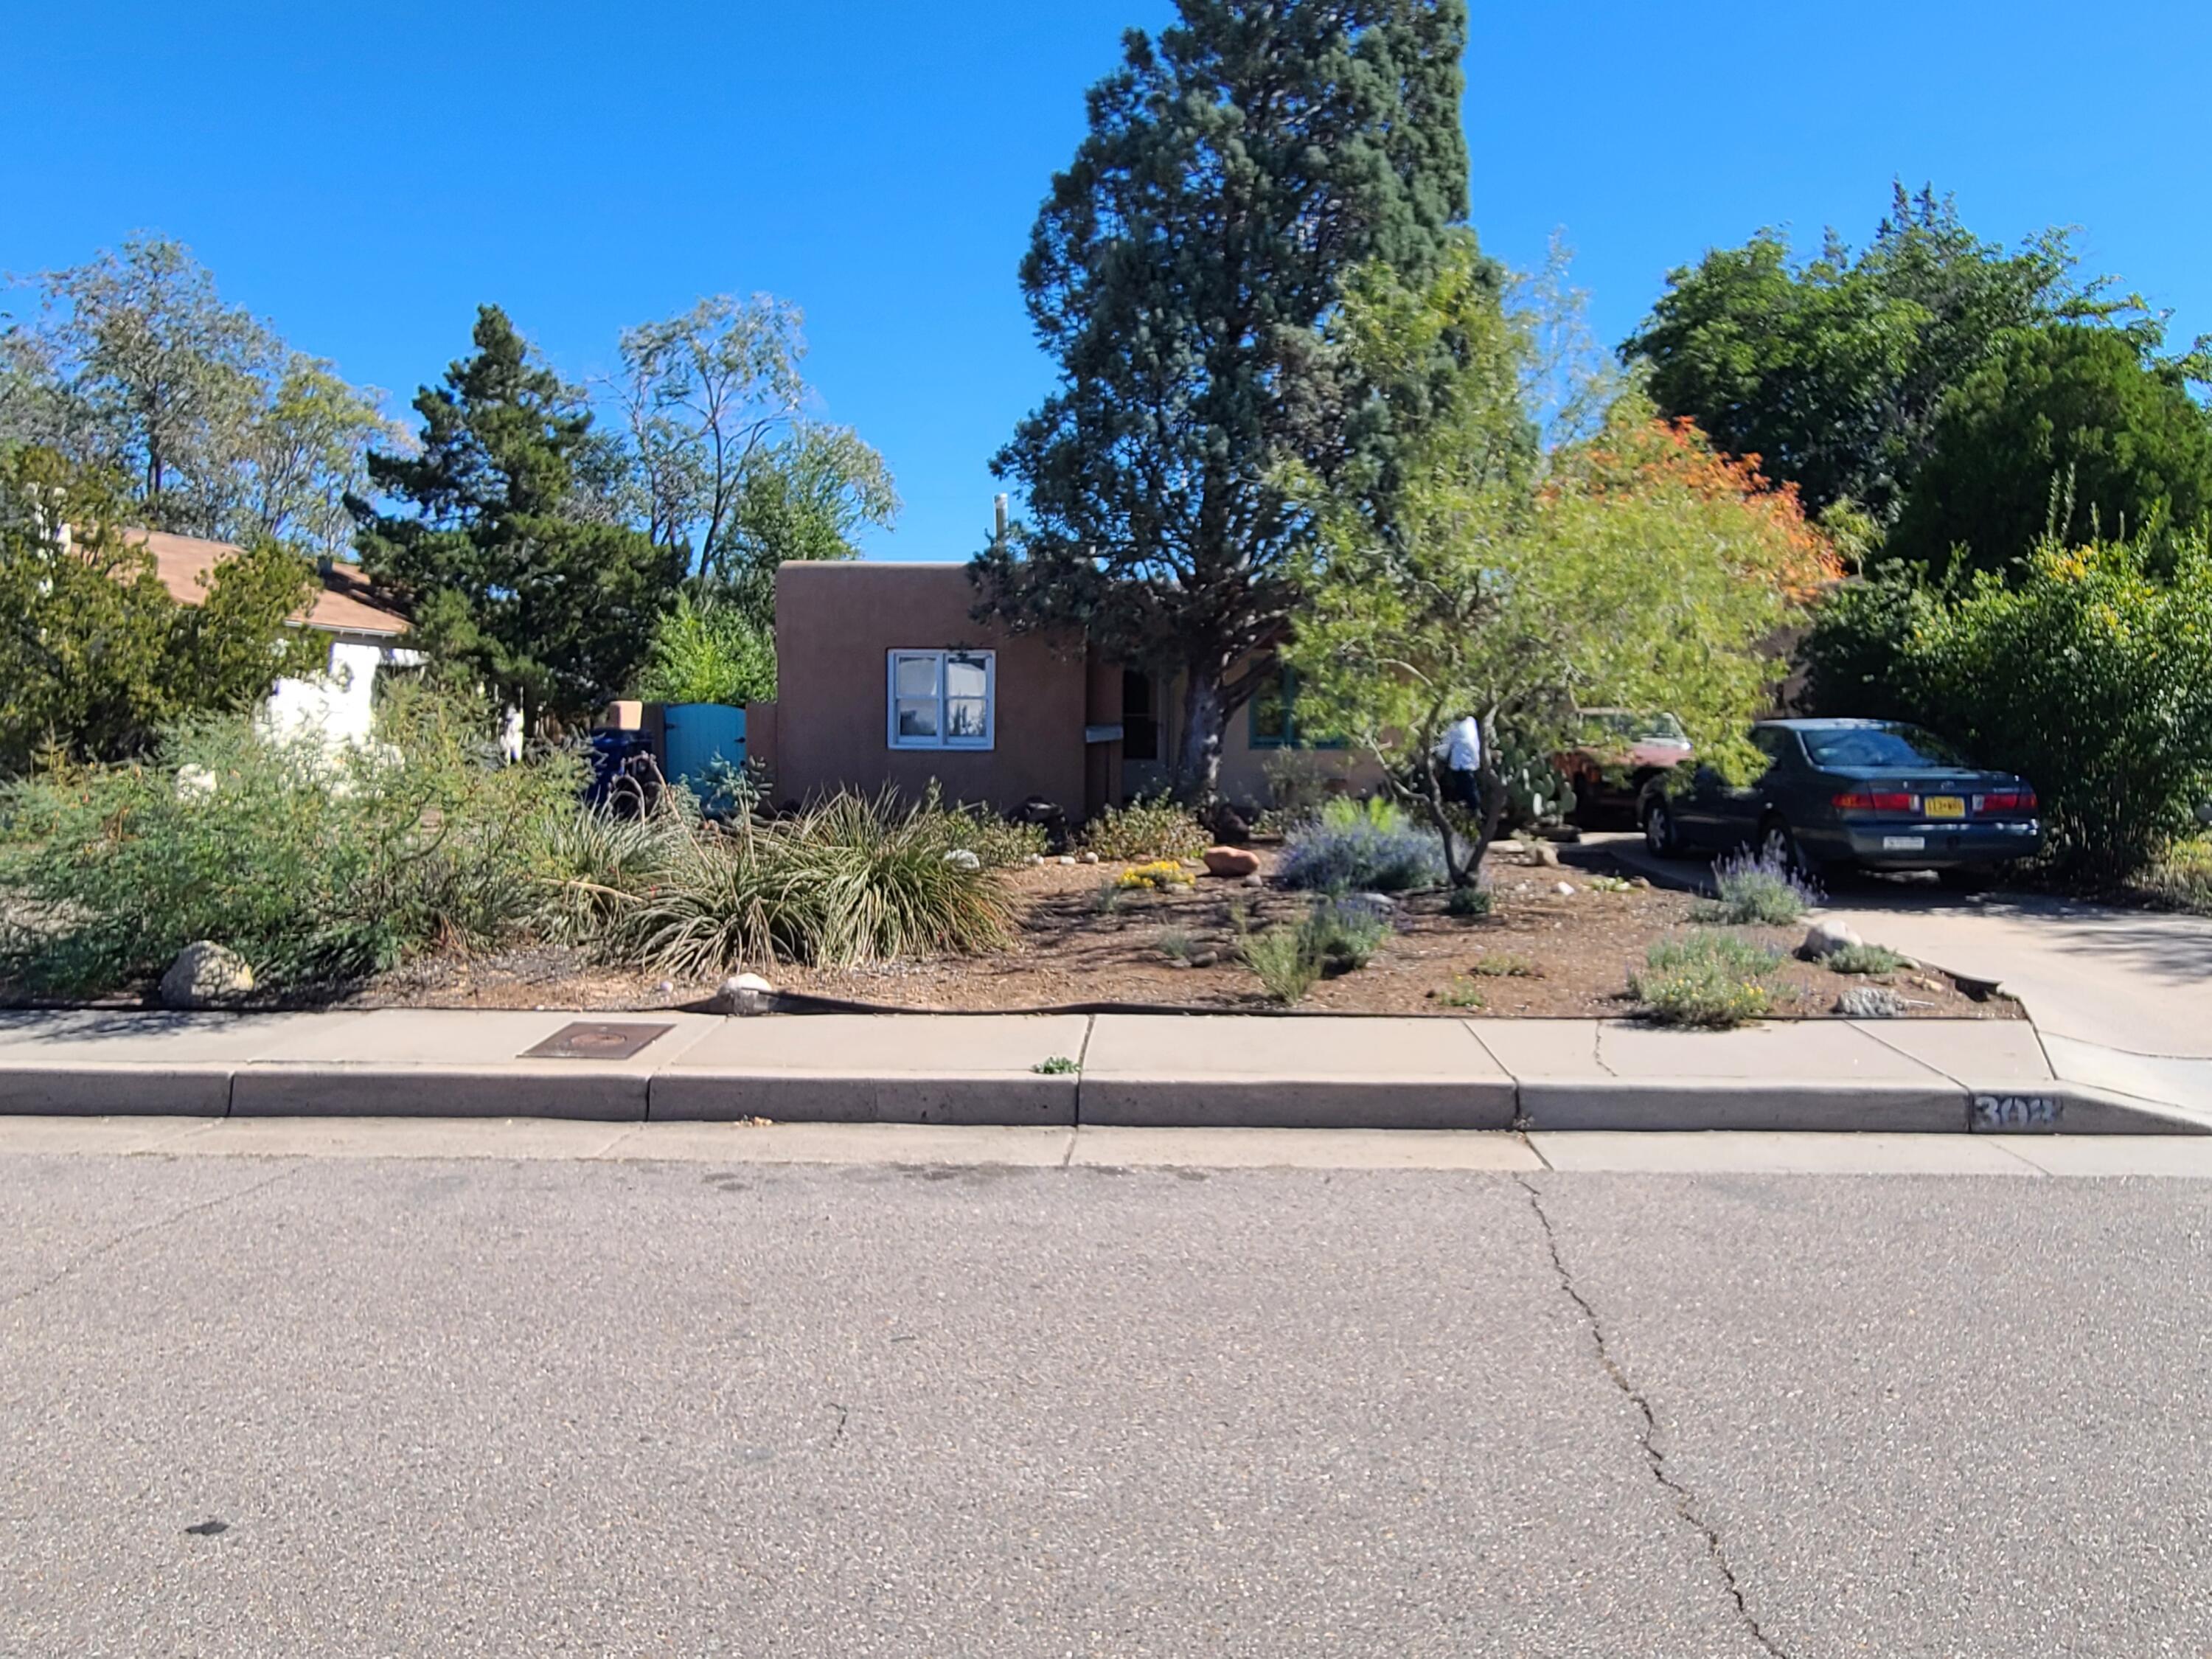 This UNM area 3 Bd./1.75 Ba. casa has 1600 plus sq ft of Southwestern charm and has been very well-maintained with upgraded plumbing and electric. (200 Amp) It is a partial adobe that has been thoughtfully added to with a 20 X 14 Master Bd. with 3/4 Ba. & a 19 X 15 family rm that egresses to an inviting xeriscaped backyard. Recently refinished original hardwood floors in front living room and bedrooms. Living room has beams, T & G ceilings & a custom W/B Kiva FP. Galley kitchen is tiled, has tons of cabinets and is flooded with natural light.  Natural SW landscaping in front and back. WOW! Hurry on this one. VLB       Thanks